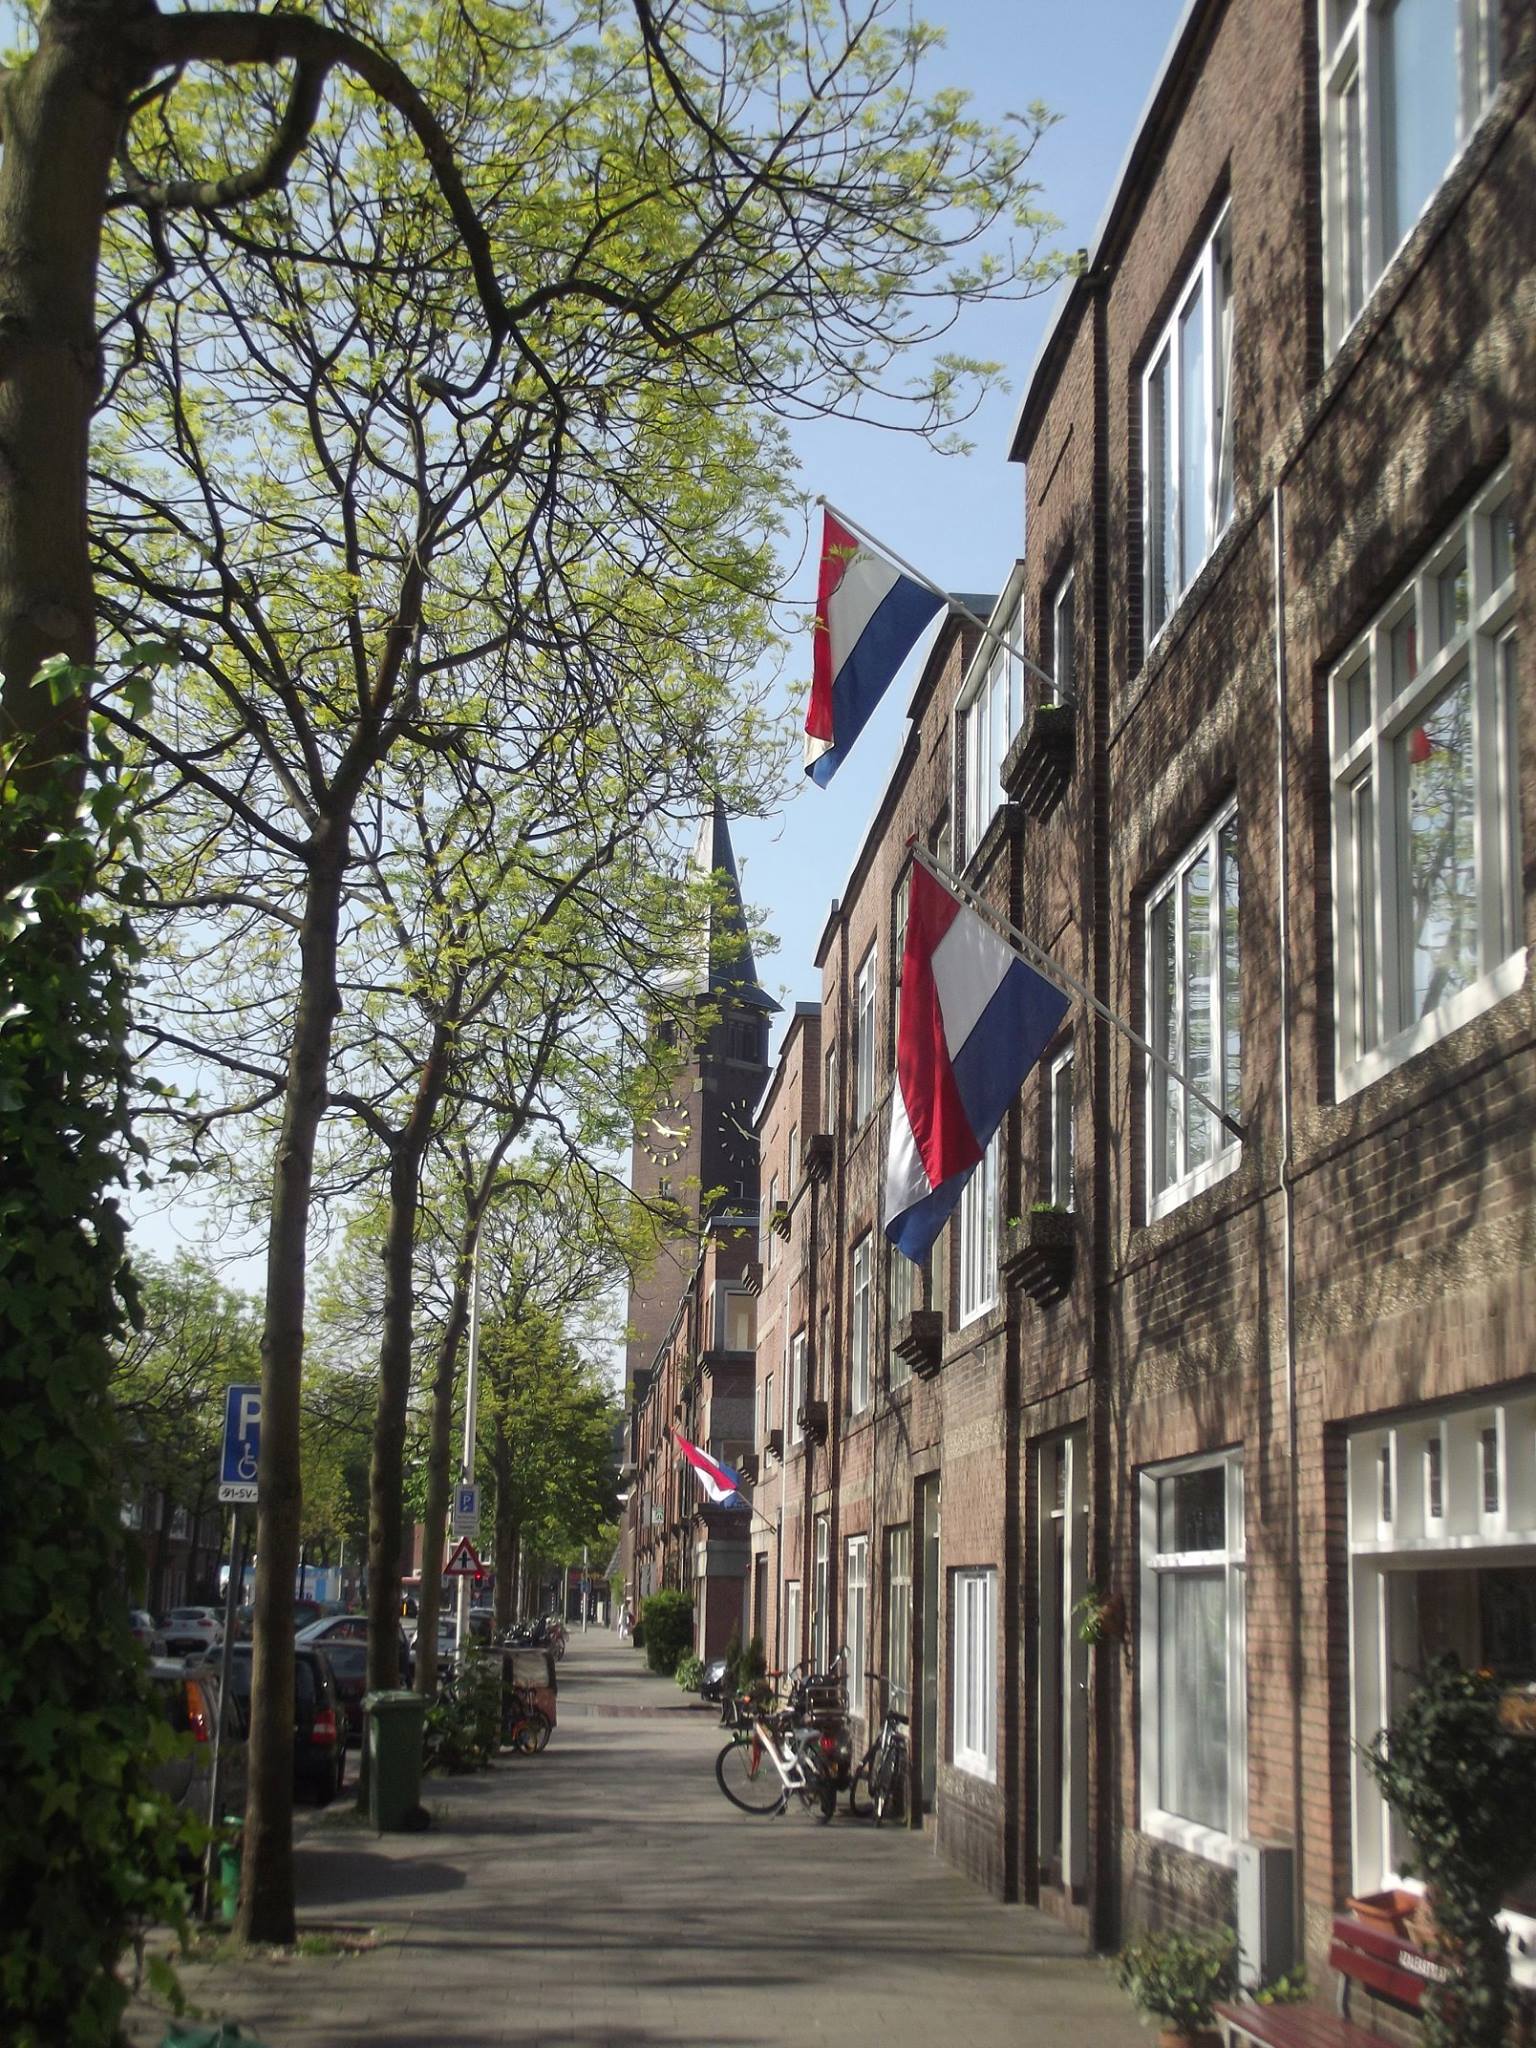 Dutch Flags flying in the street on Liberation Day, May 5.